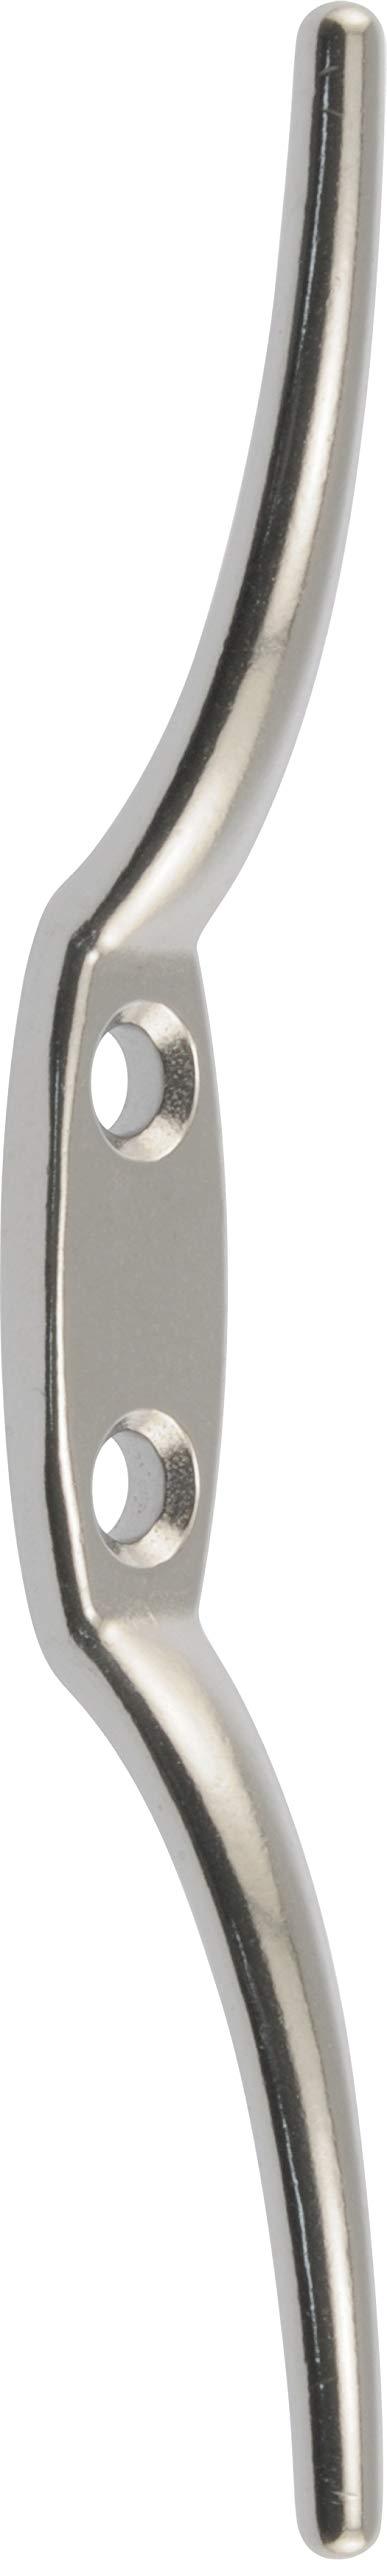  [AUSTRALIA] - Hillman Hardware Essentials 853317 Rope Cleat Stainless Steel 6" - 2 Pack 6-1/2 Inch